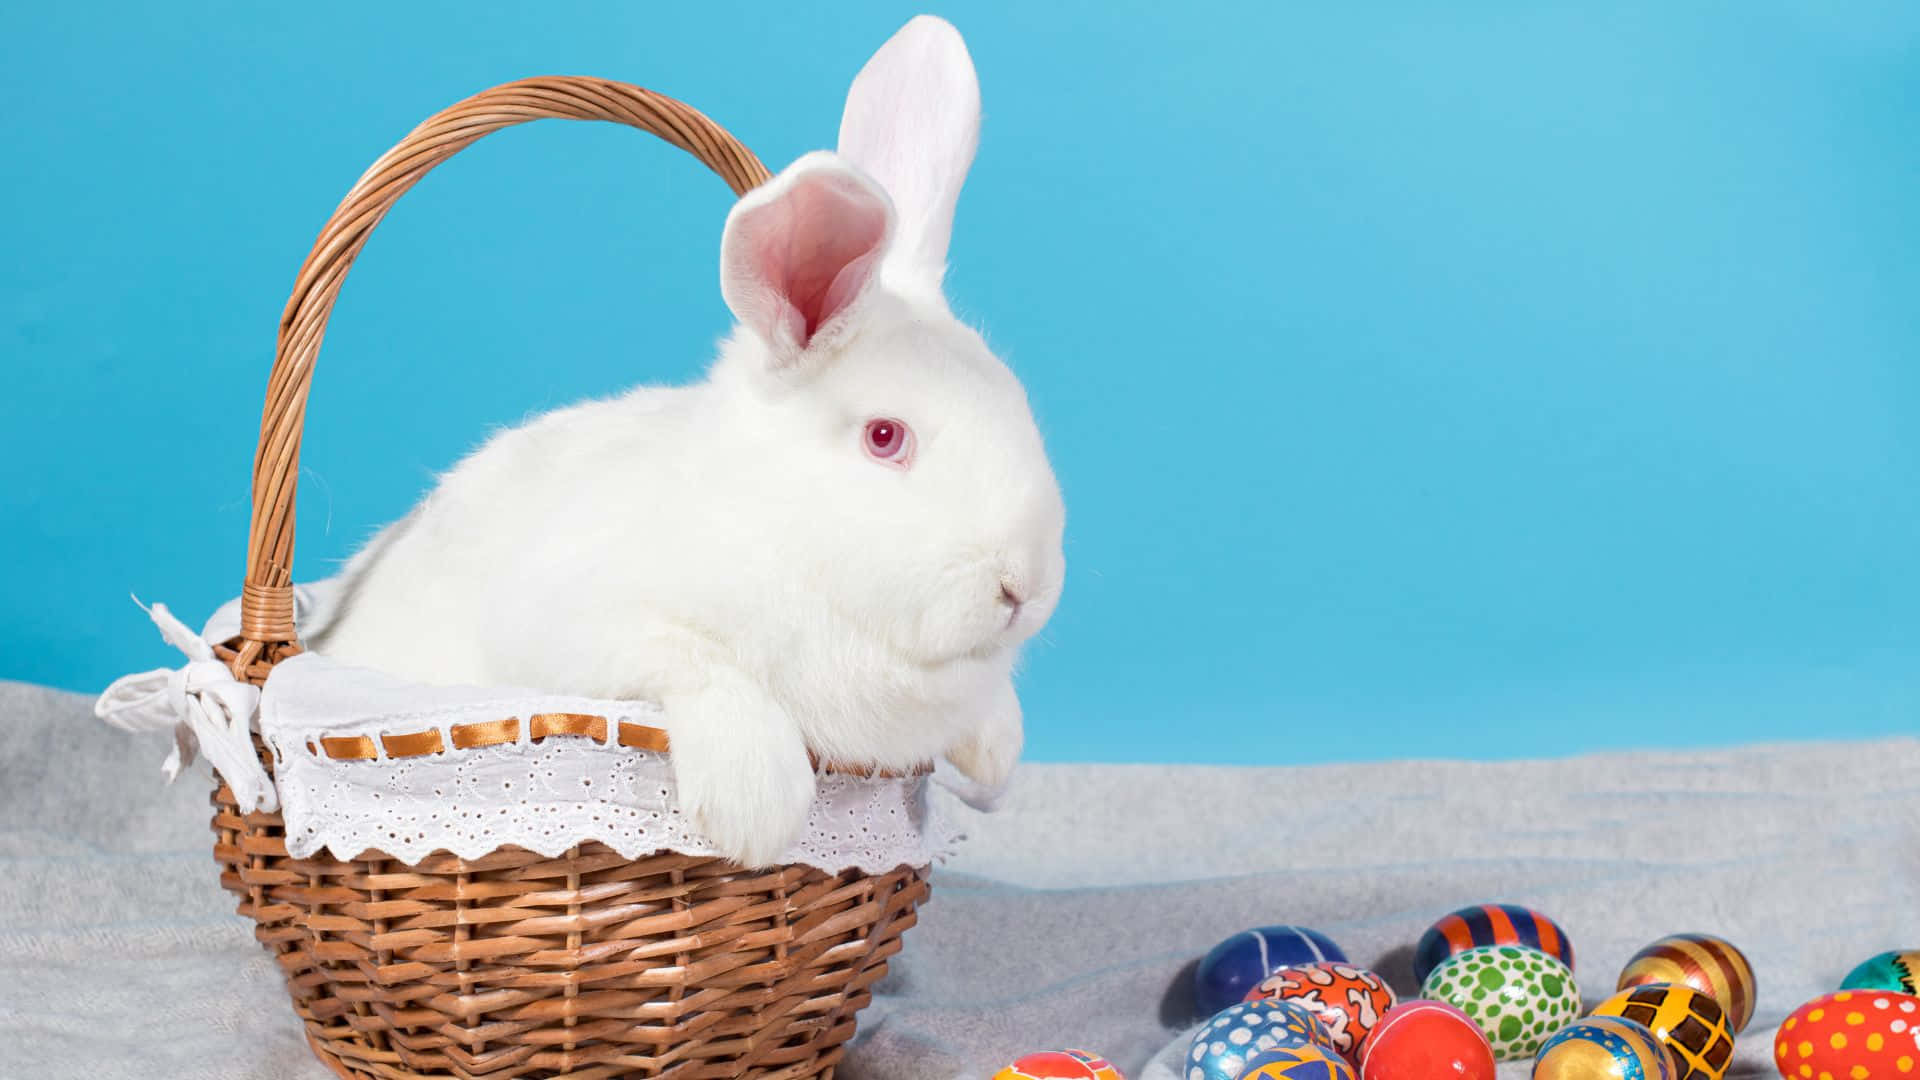 Celebrate Easter with a Colorful Basket of Sweet Treats Wallpaper